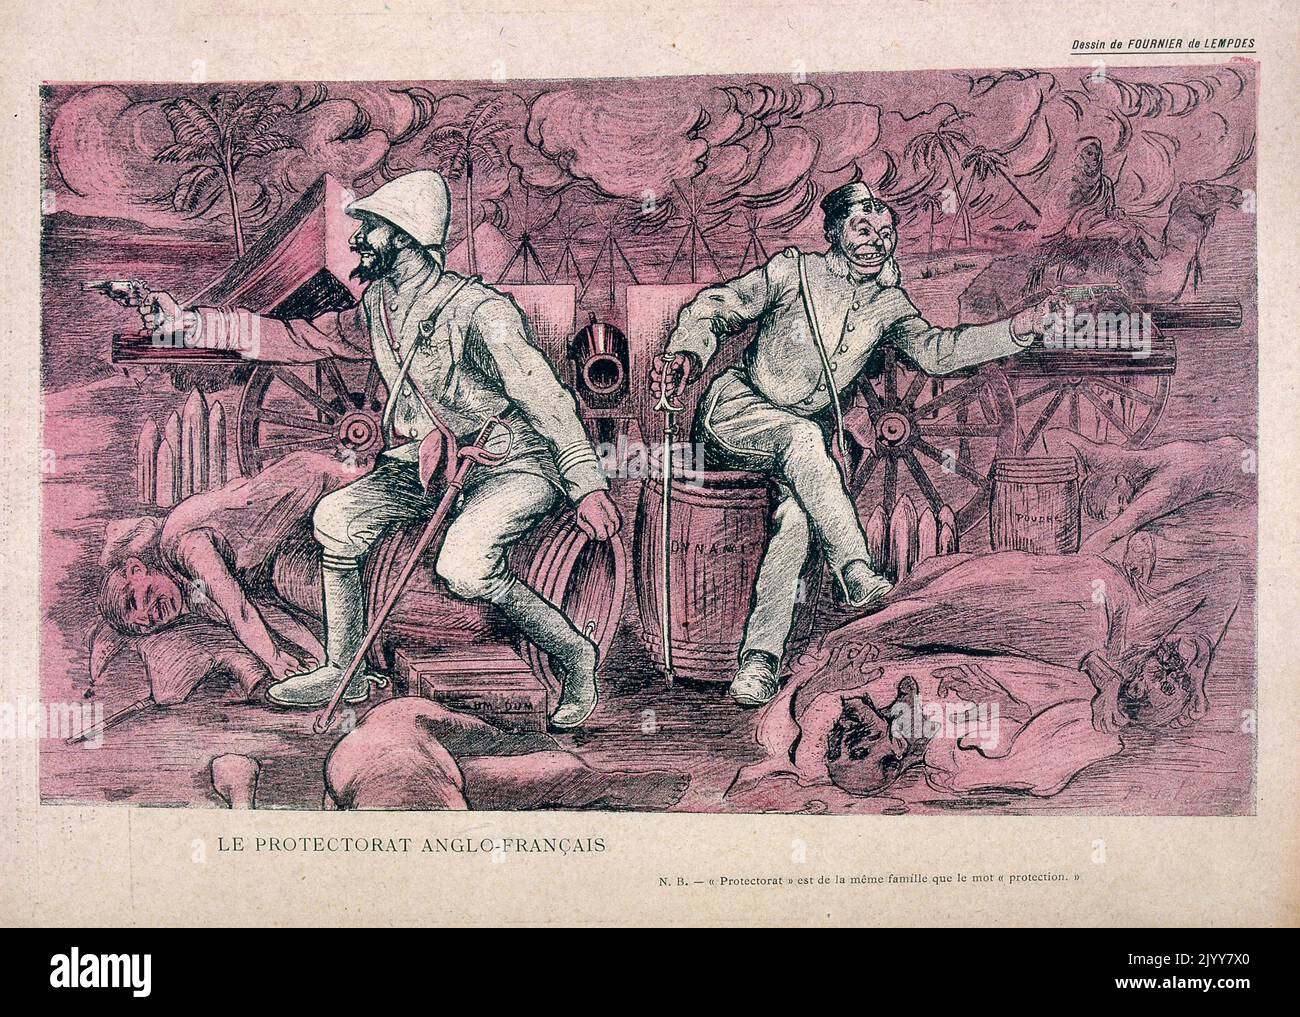 In L'Assiette au Beurre satirical magazine; Edition: Black Masses. Coloured Illustration: Dead bodies surround the English and French officers. Caption: The Anglo-French Protectorate- subtitle the word comes from the root 'protection'. Stock Photo